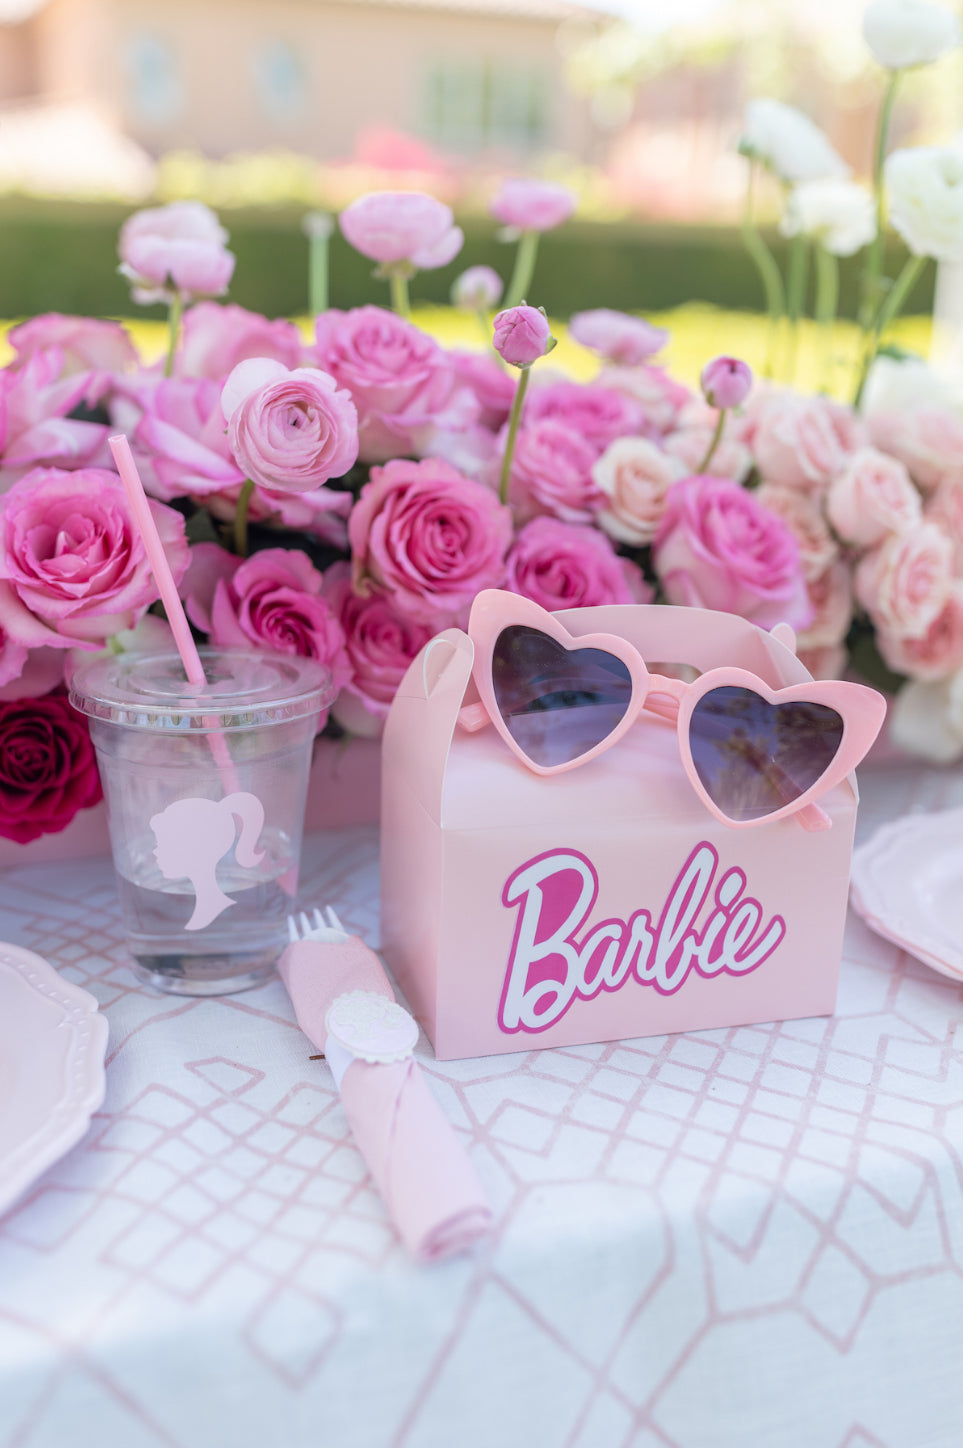 Come on Barbie, Let’s go Party!